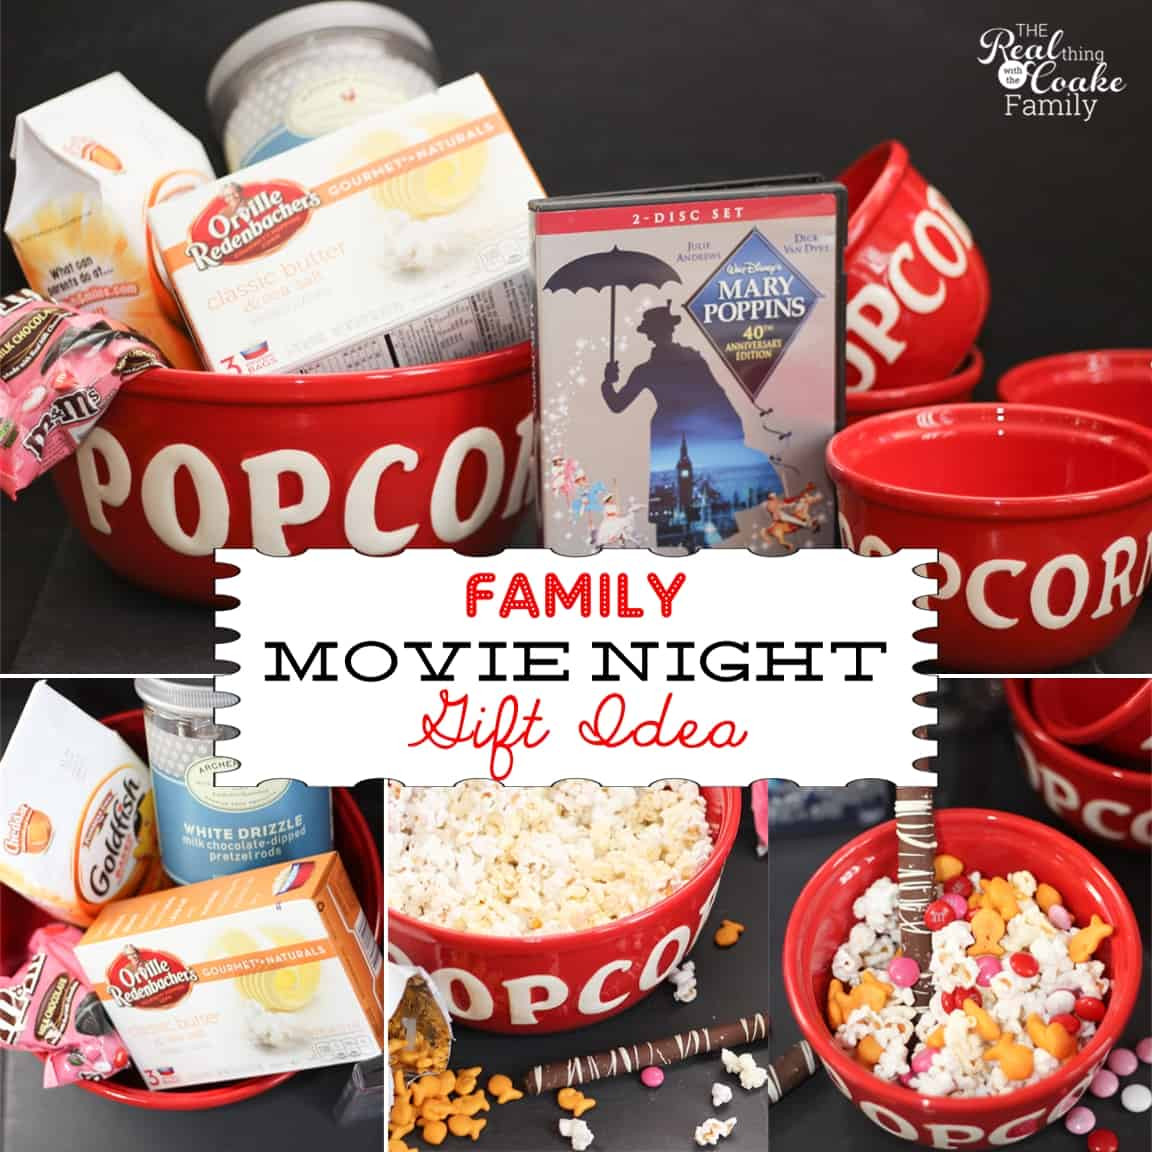 Holiday Gift Ideas For Family
 Family Gift Ideas Movie Night in a box or basket